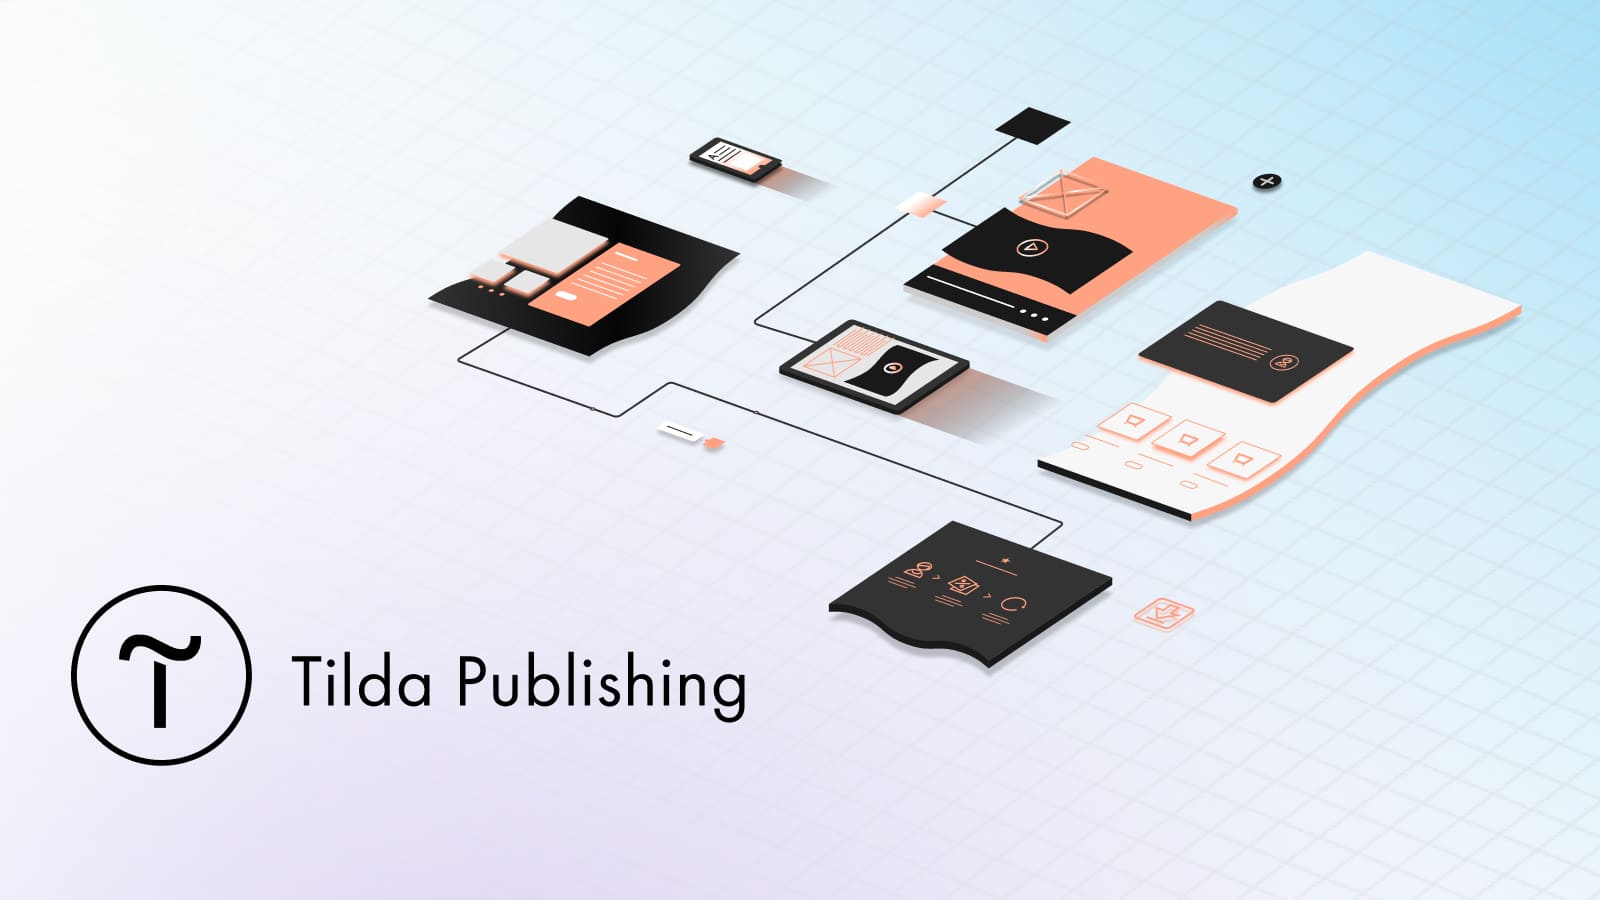 Tilda is a website building platform with a modular system and ready-made templates.